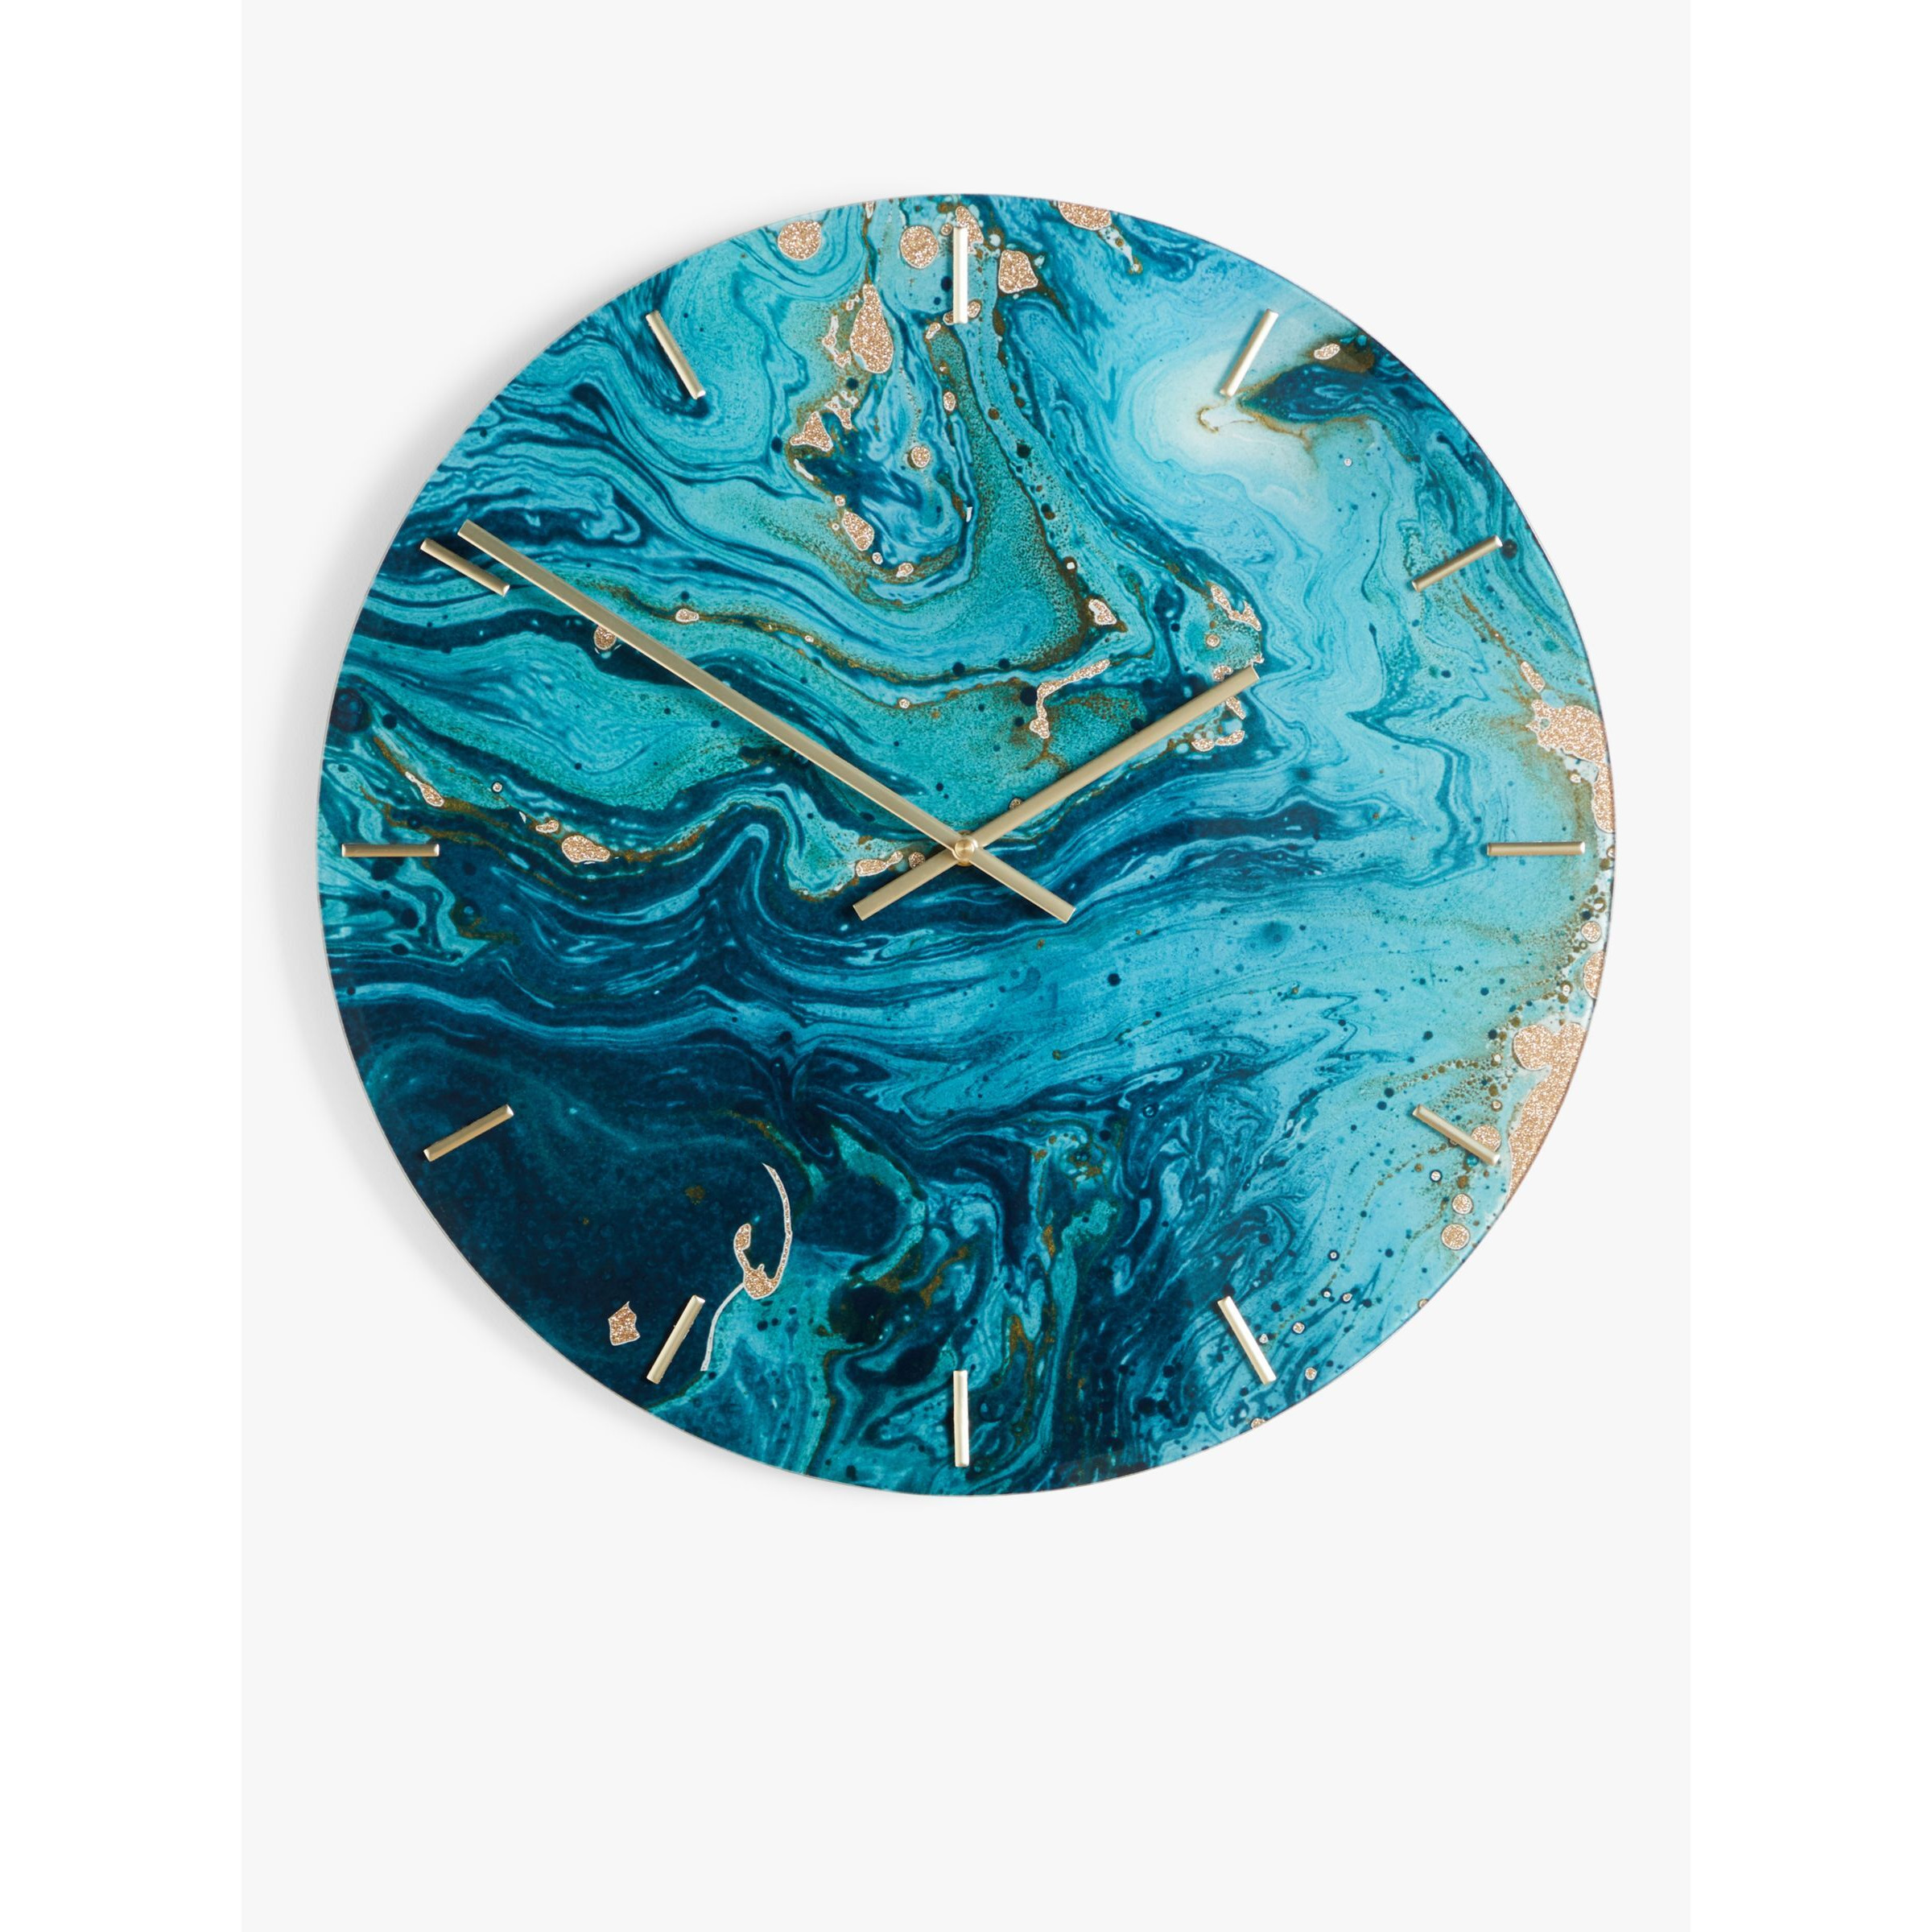 John Lewis Marble-Effect Glass Analogue Wall Clock, 50cm, Blue - image 1